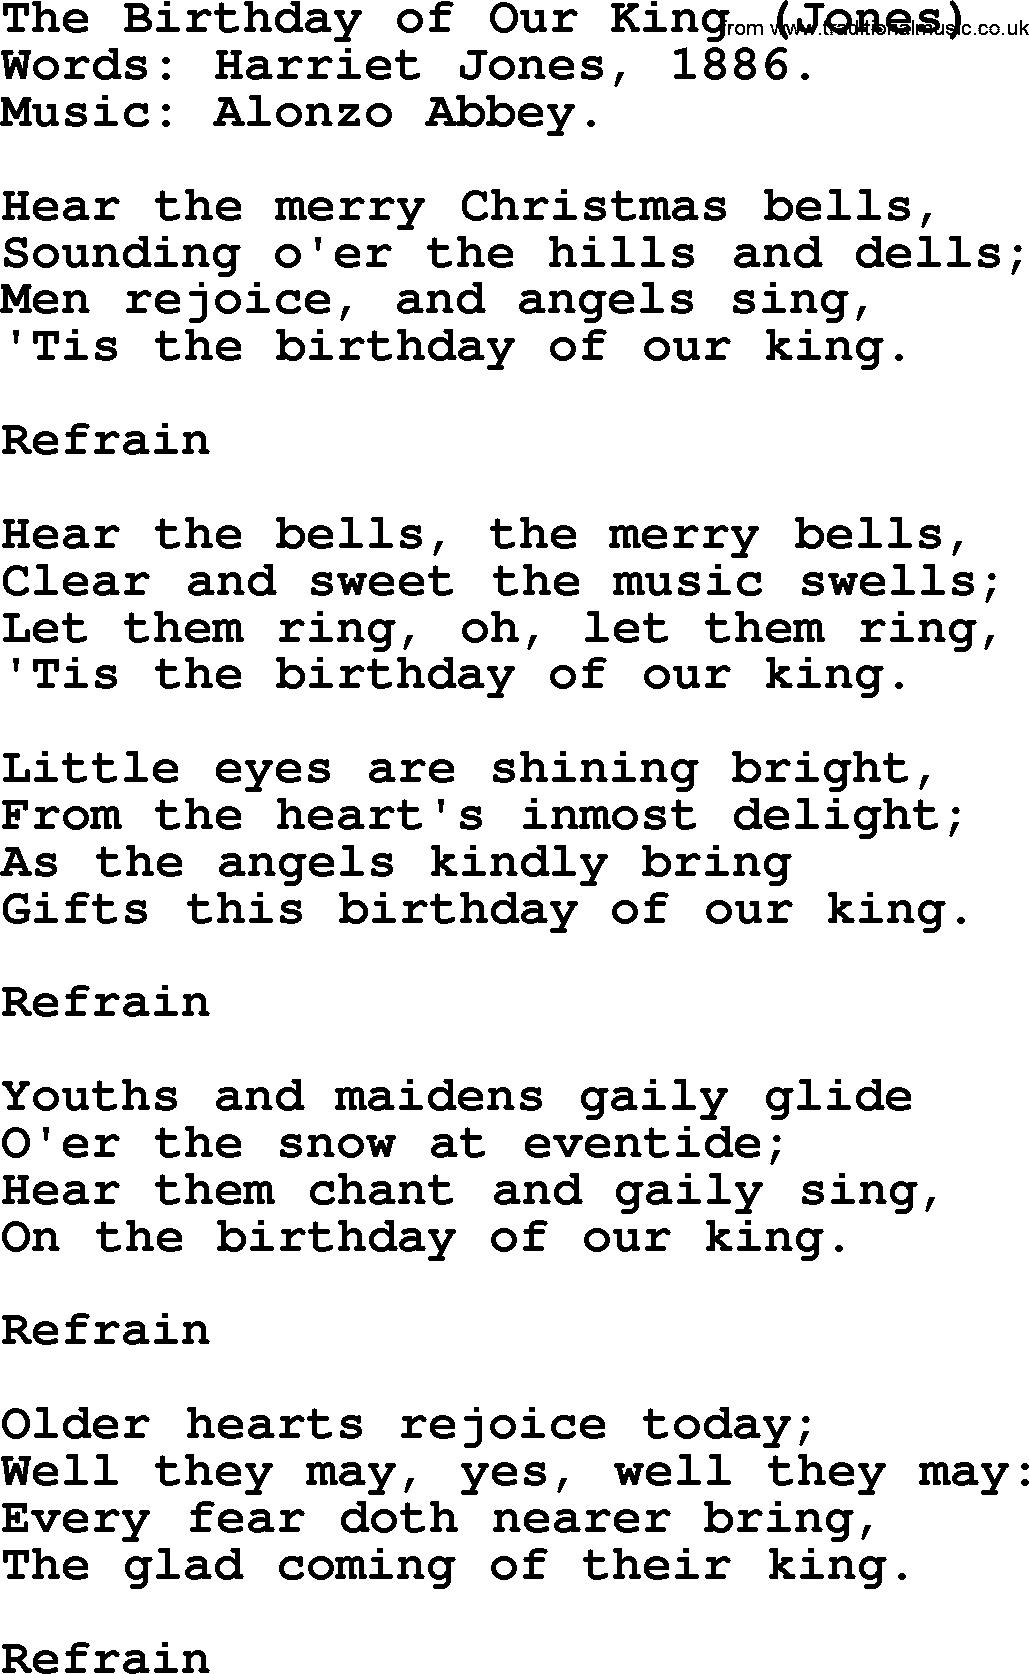 Christmas Hymns, Carols and Songs, title: The Birthday Of Our King (jones), lyrics with PDF